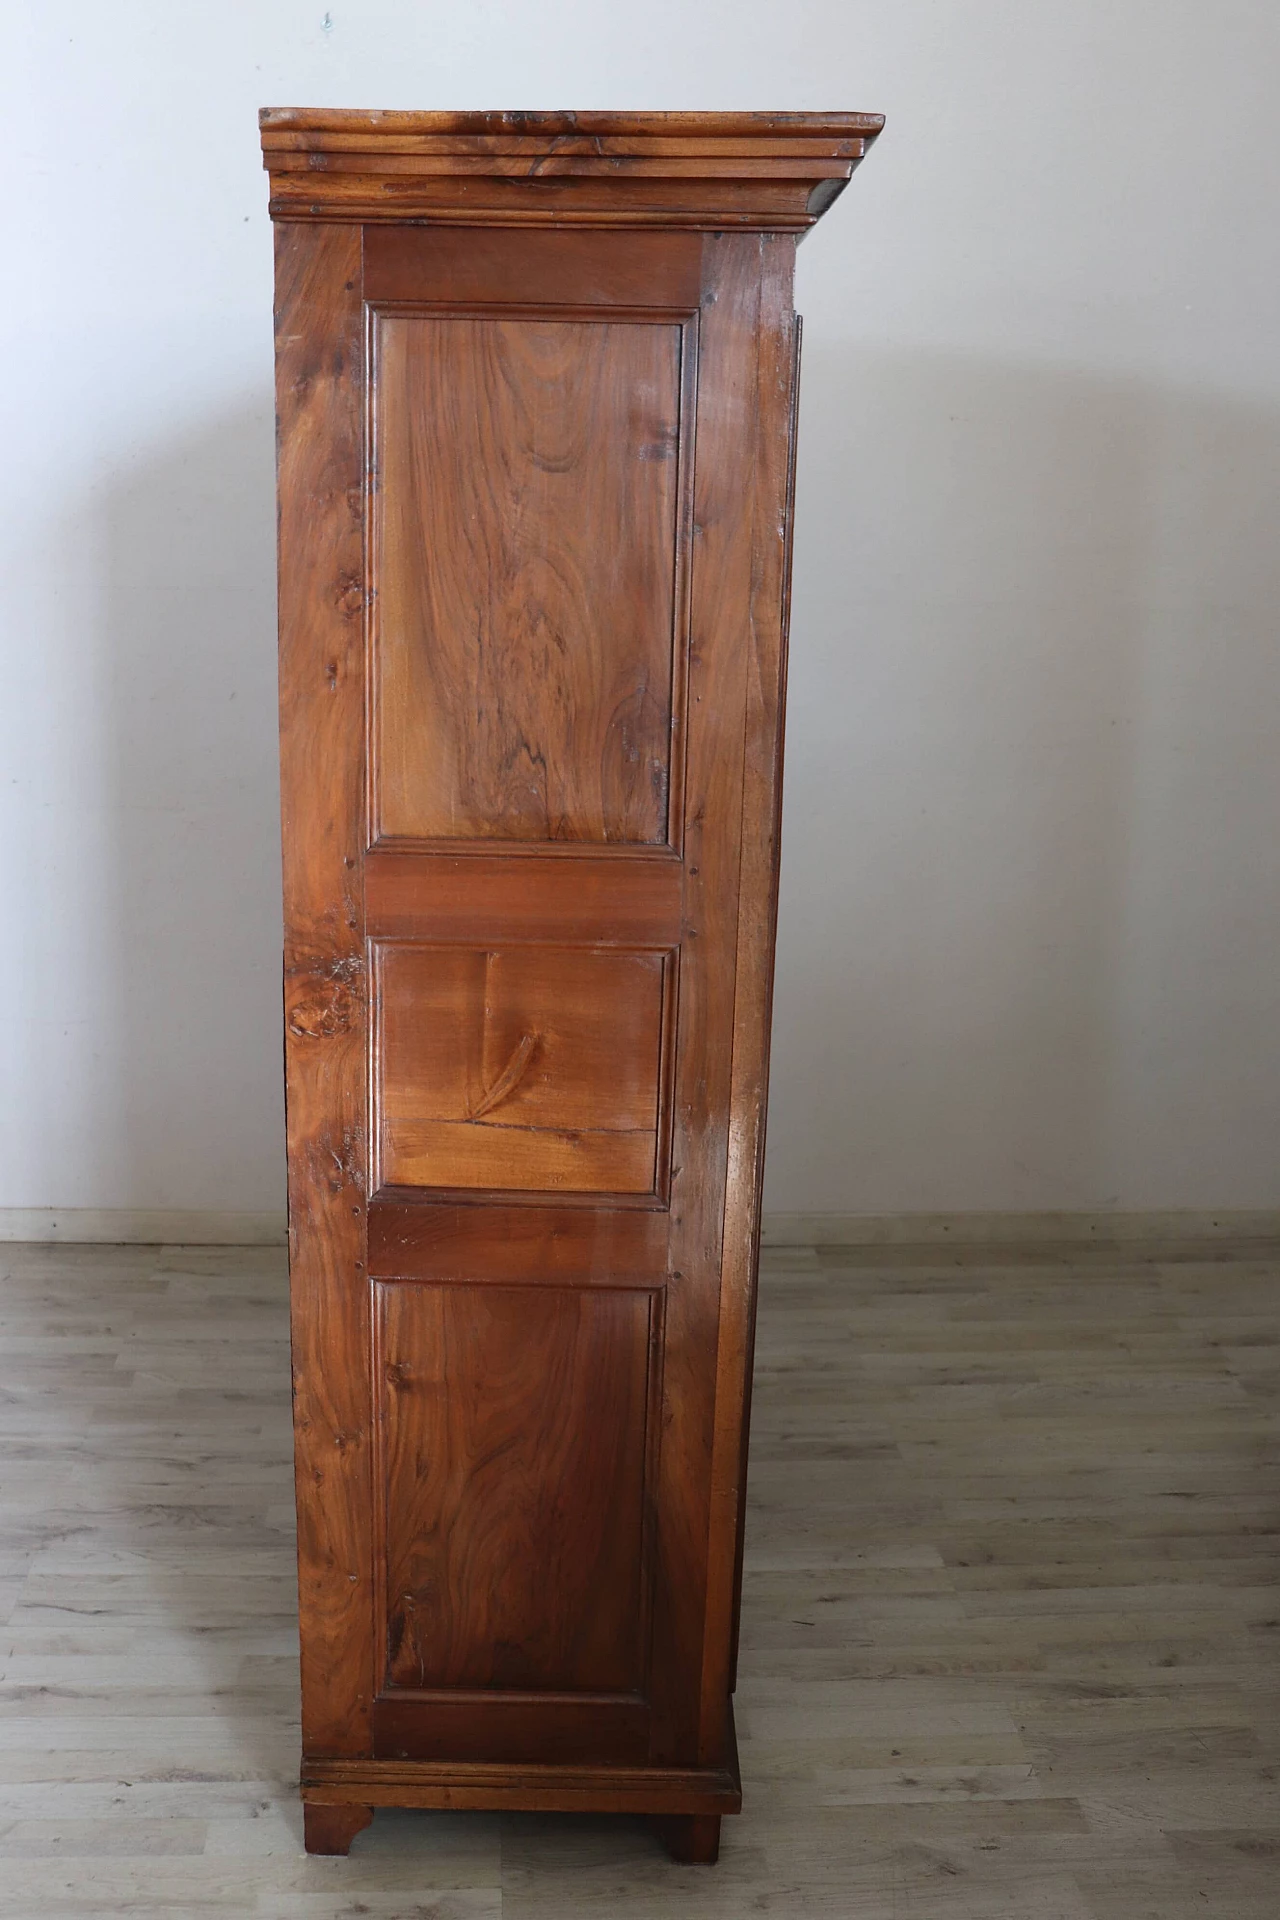 Solid walnut wardrobe with two doors, mid-18th century 18